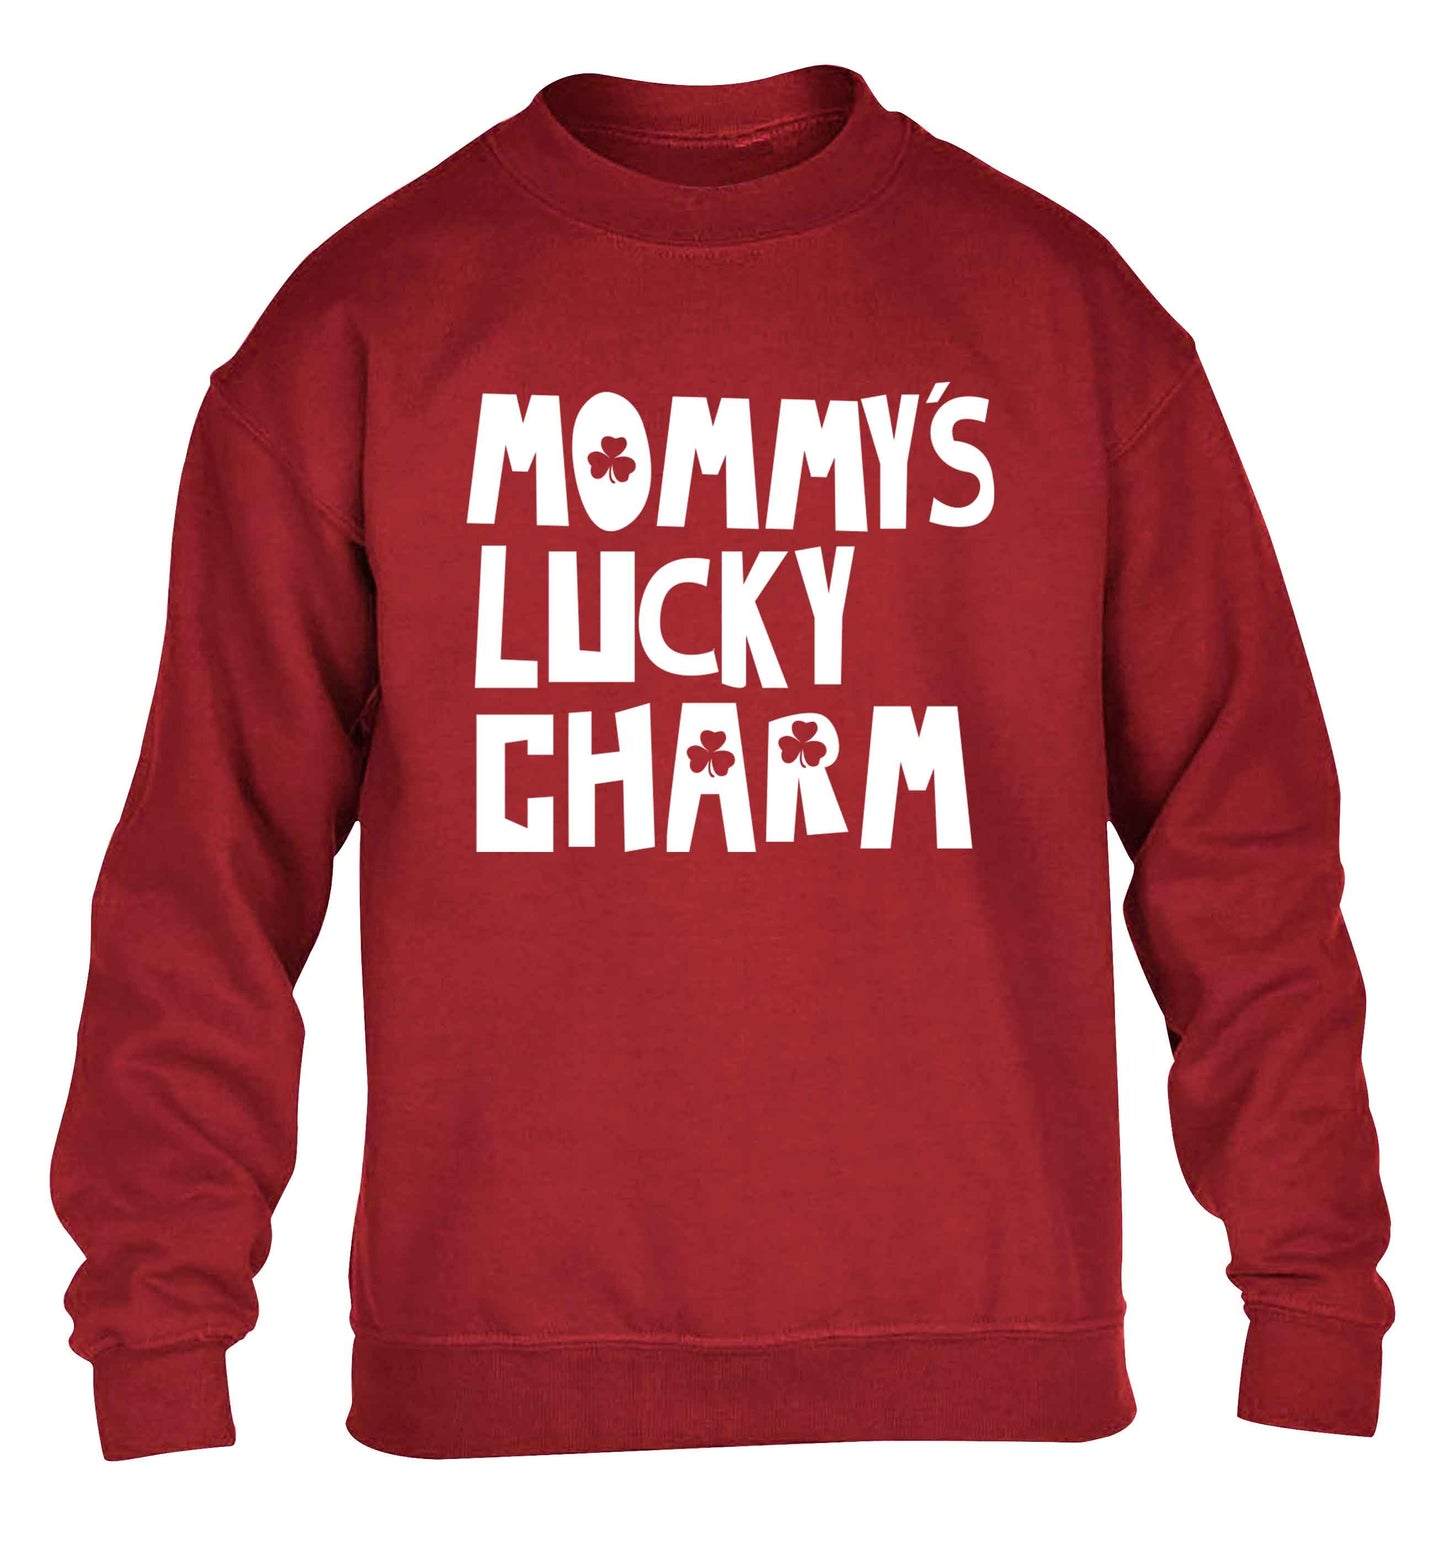 Mommy's lucky charm children's grey sweater 12-13 Years